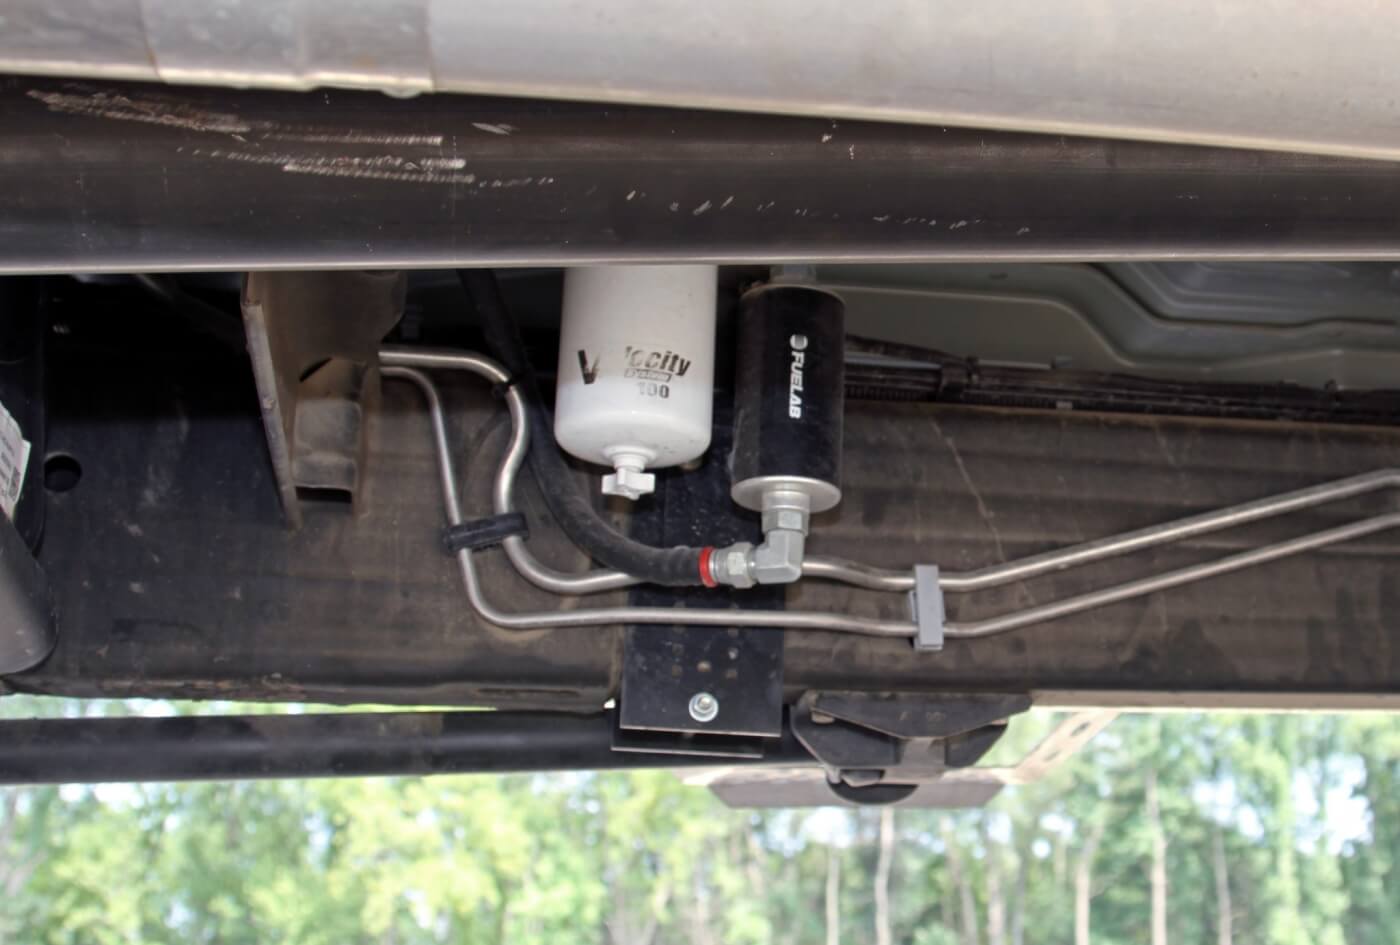 A Fuel Lab 100 GPH pump and filter system, mounted on the frame rail forward of the fuel tank, ensures adequate fuel flow to the modified Duramax.